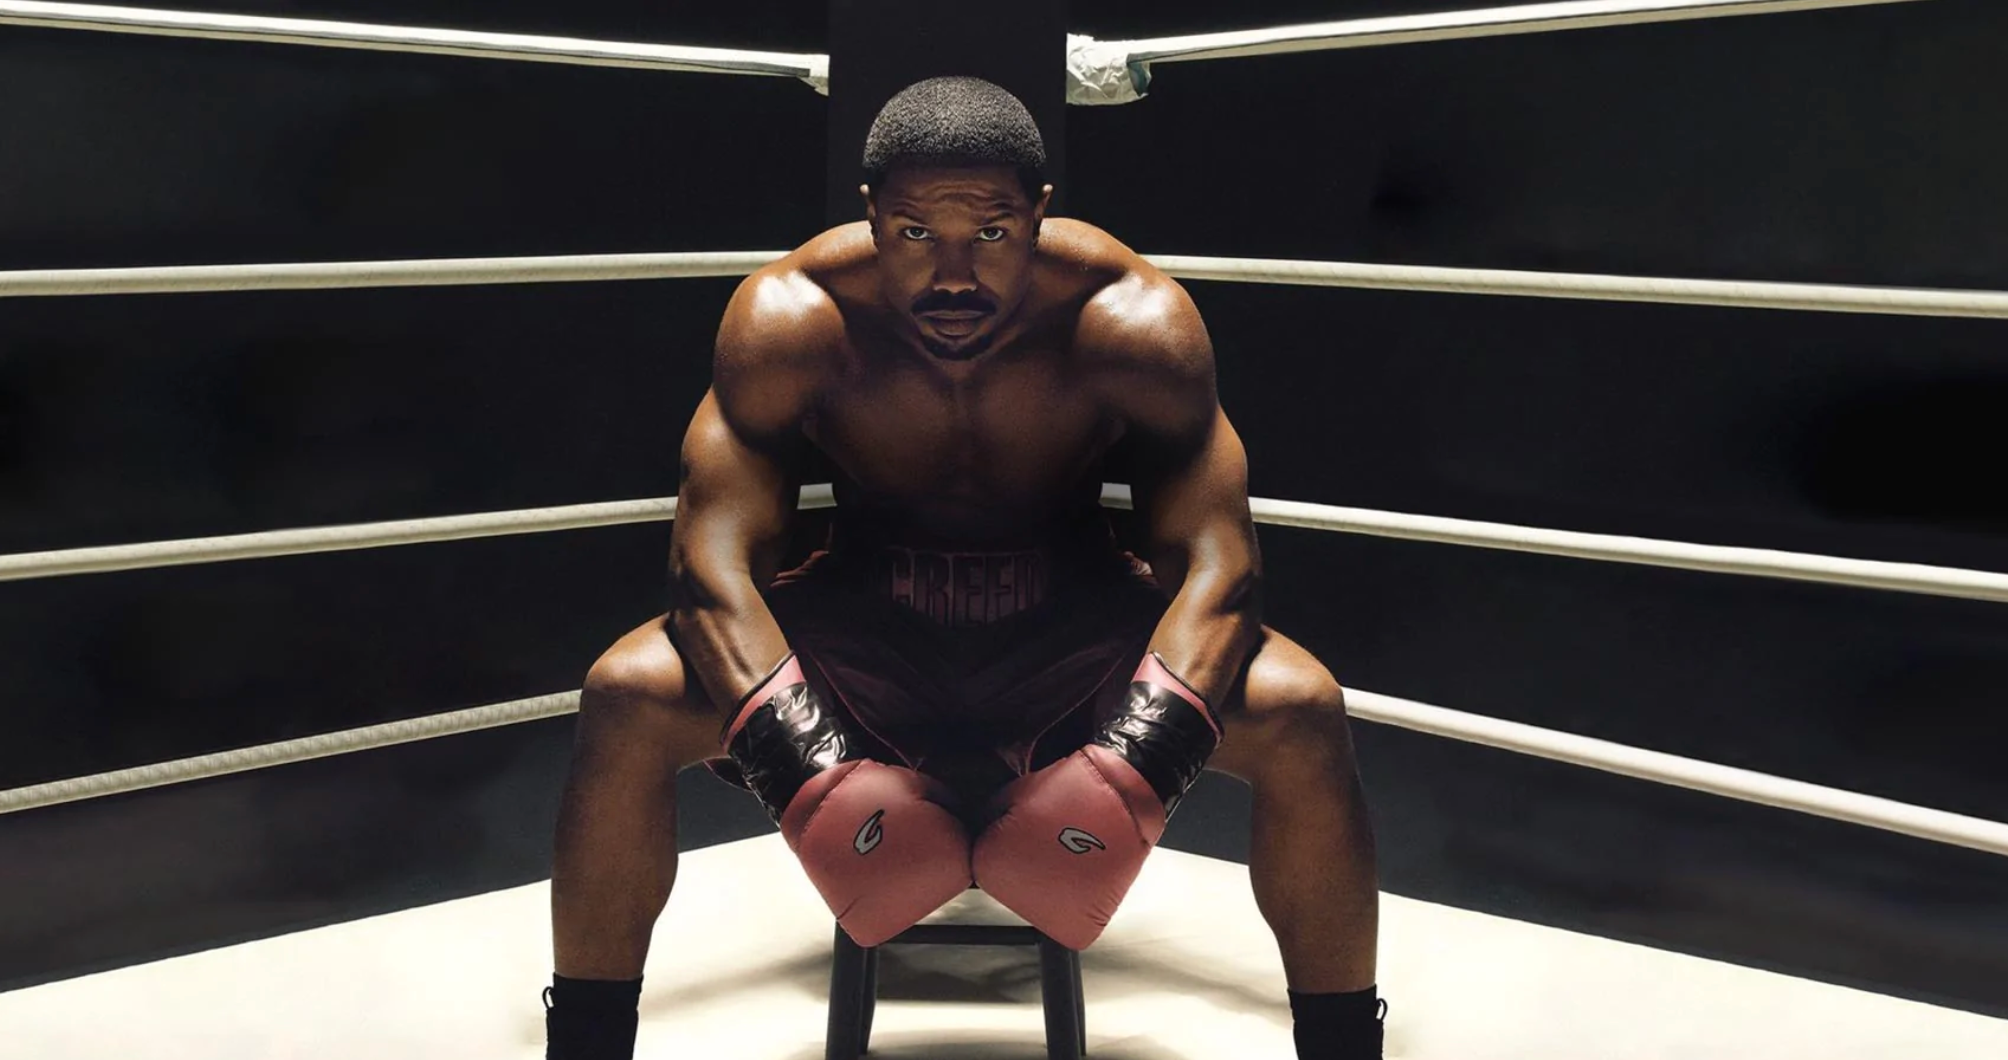 Michael B Jordan on his bold photoshoot: 'my mamma's gonna have to see this